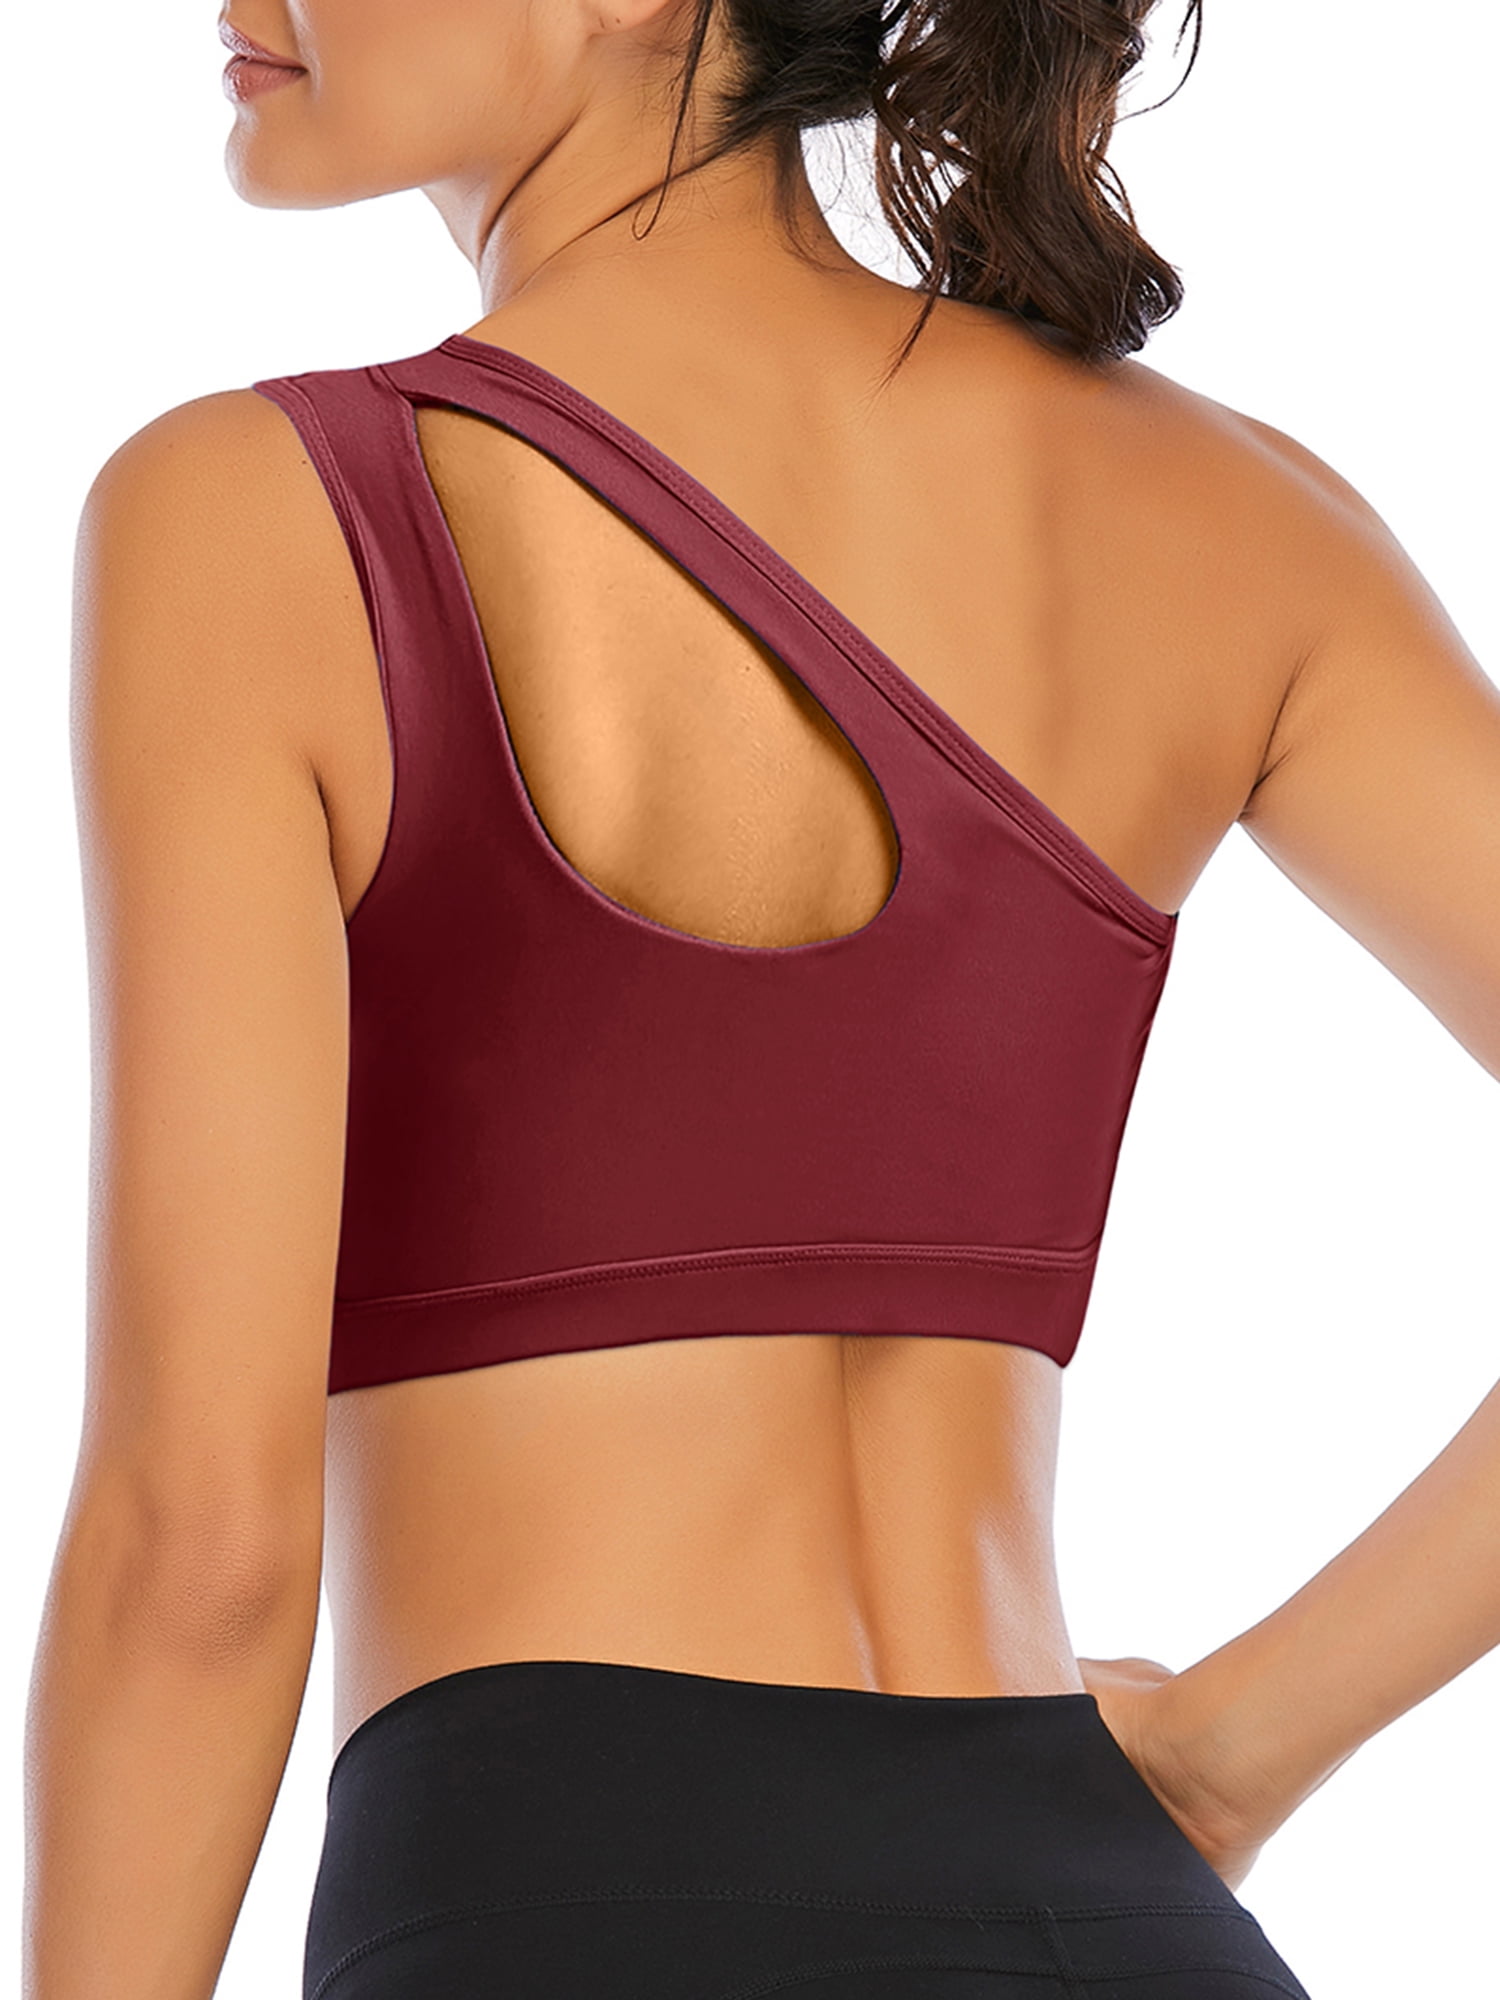 Women's One Shoulder Cut Out Tank Top Workout Padded Sports